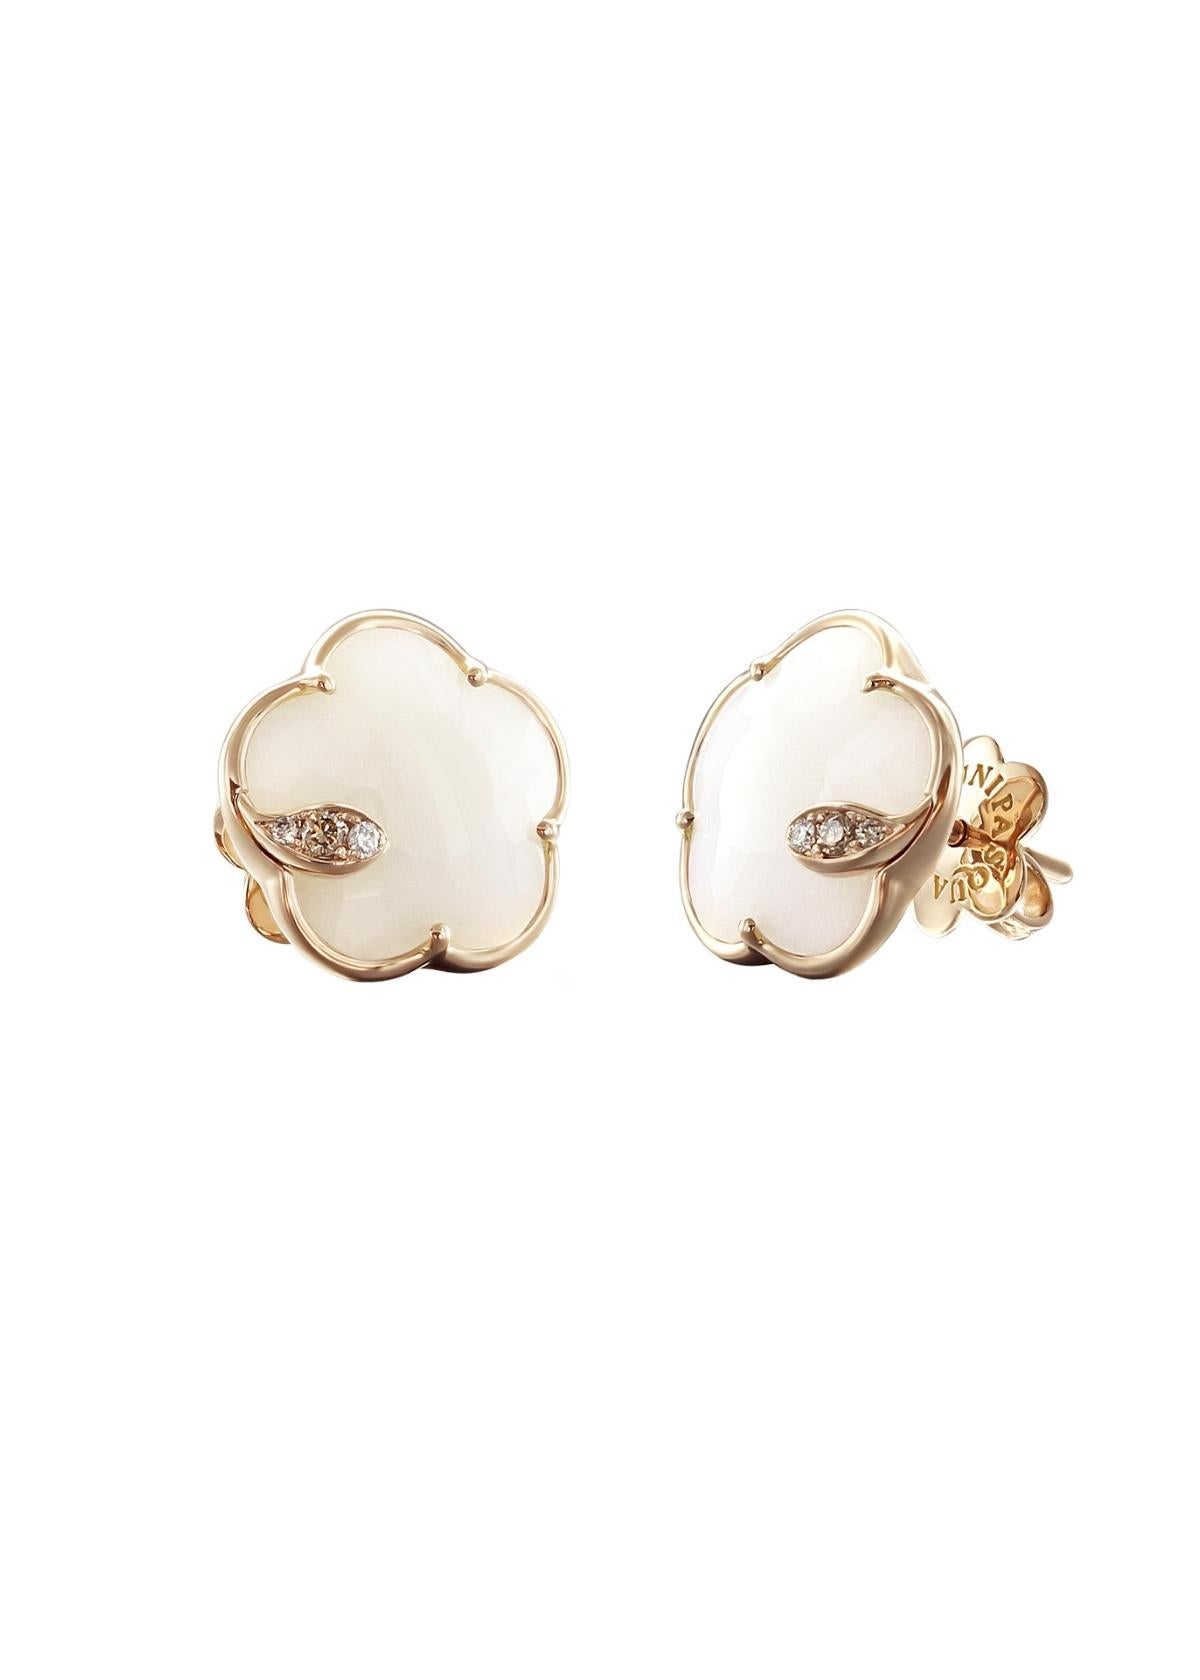 Petit Joli Earrings Earrings Rose Gold with White Agate and Diamonds 16131R For Sale 1